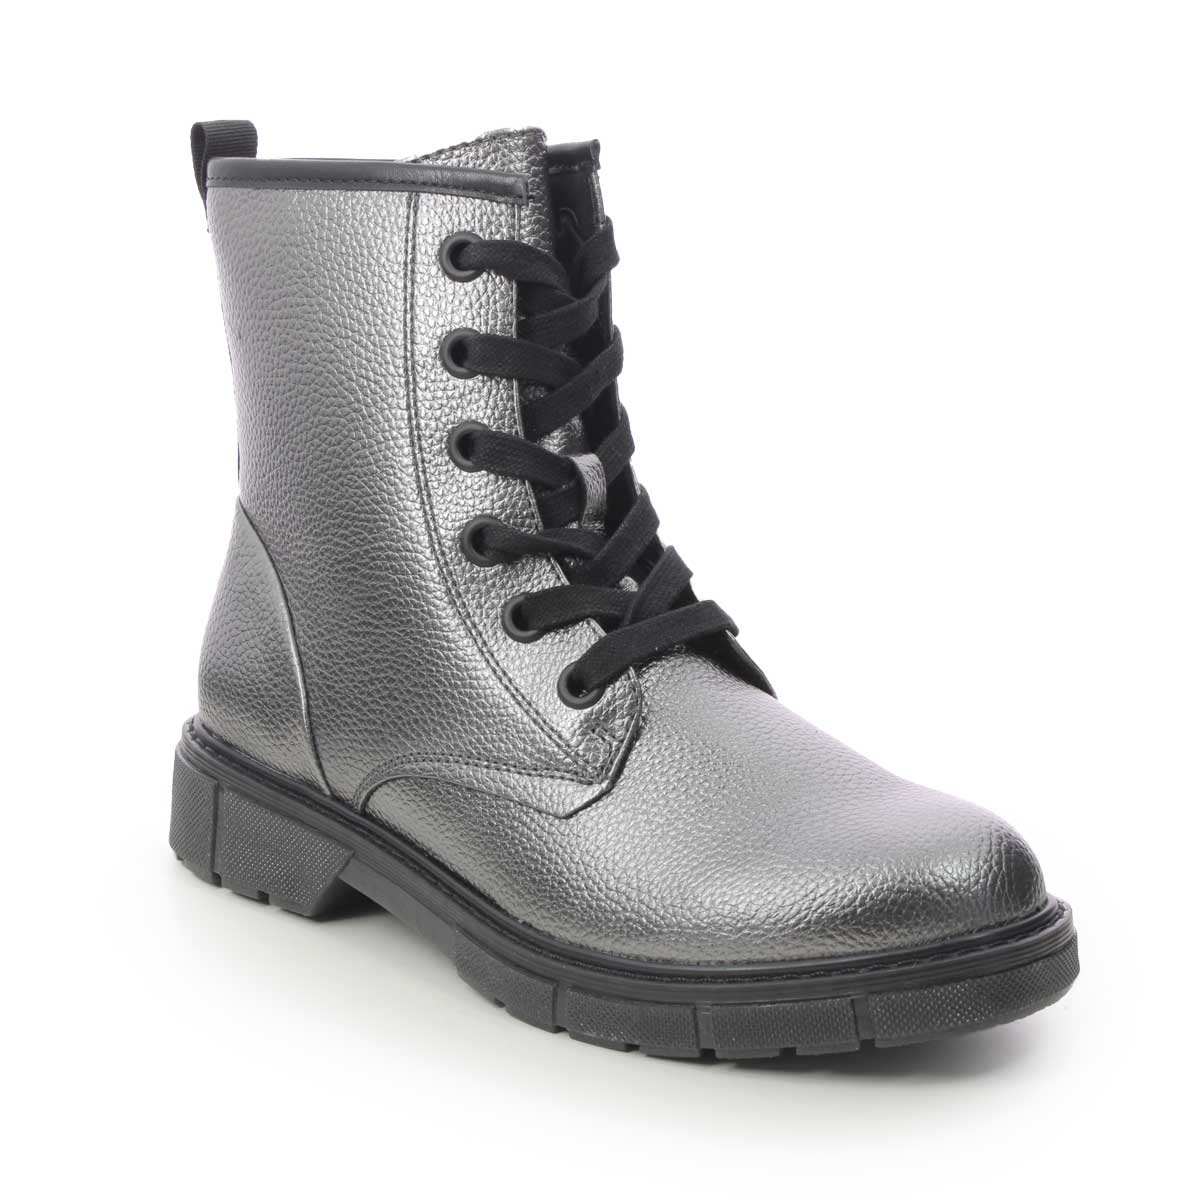 Marco Tozzi Badie Lace Pewter Womens Biker Boots 25282-41-906 in a Plain Man-made in Size 41